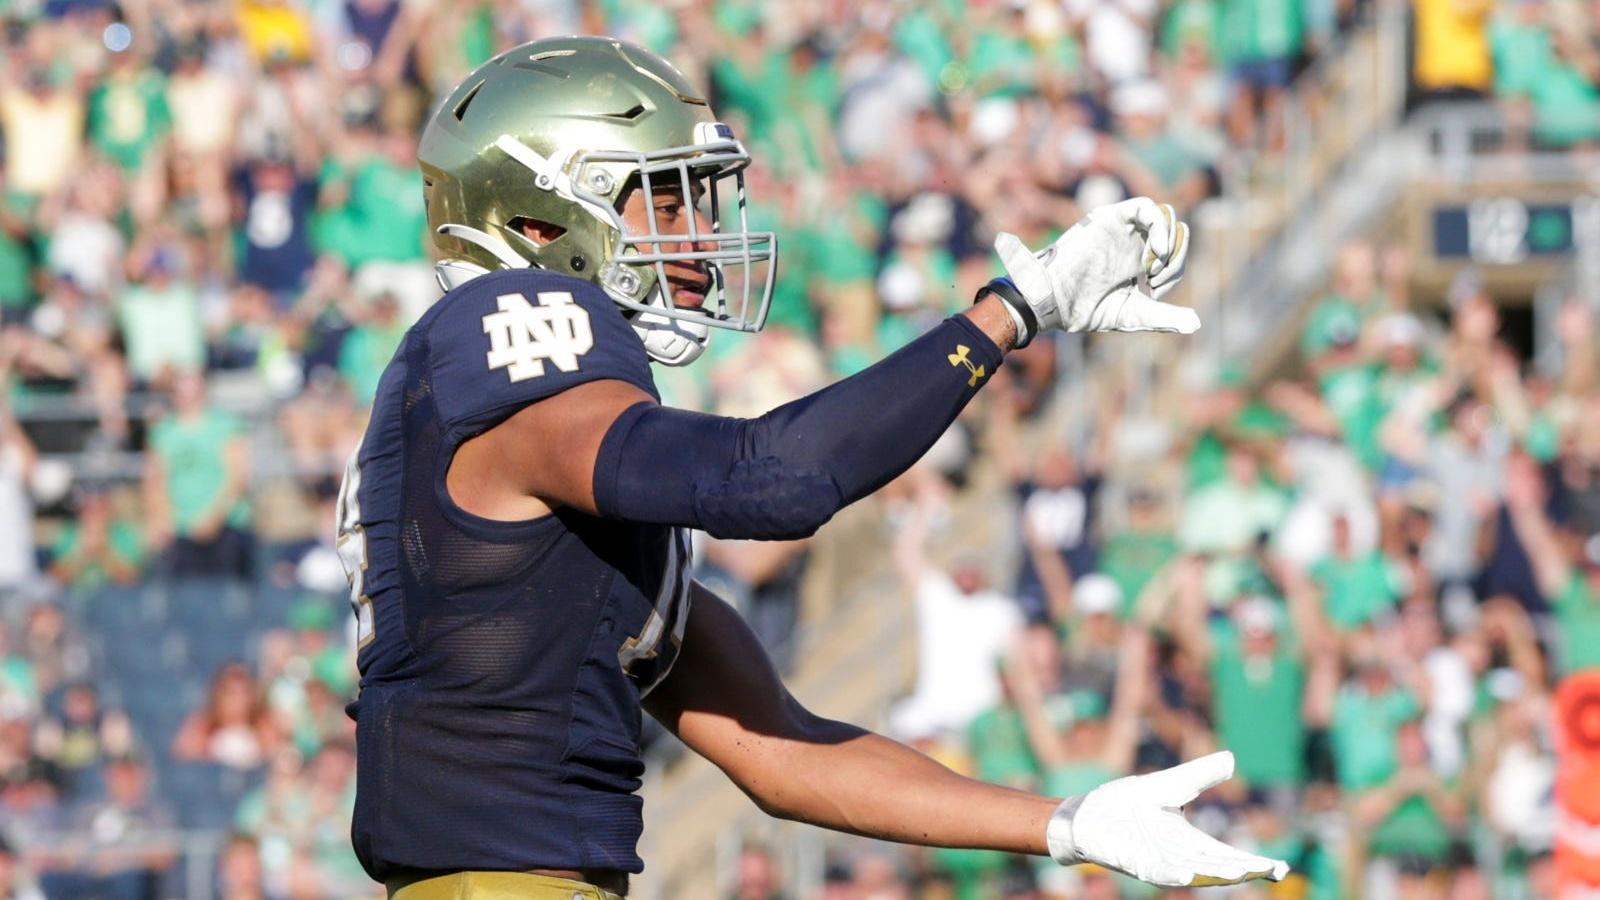 Notre Dame safety Kyle Hamilton (14) celebrates an interception during the fourth quarter of an NCAA football game, Saturday, Sept. 18, 2021 at Notre Dame Stadium in South Bend. Cfb Notre Dame Vs Purdue / © Nikos Frazier / Journal & Courier via Imagn Content Services, LLC